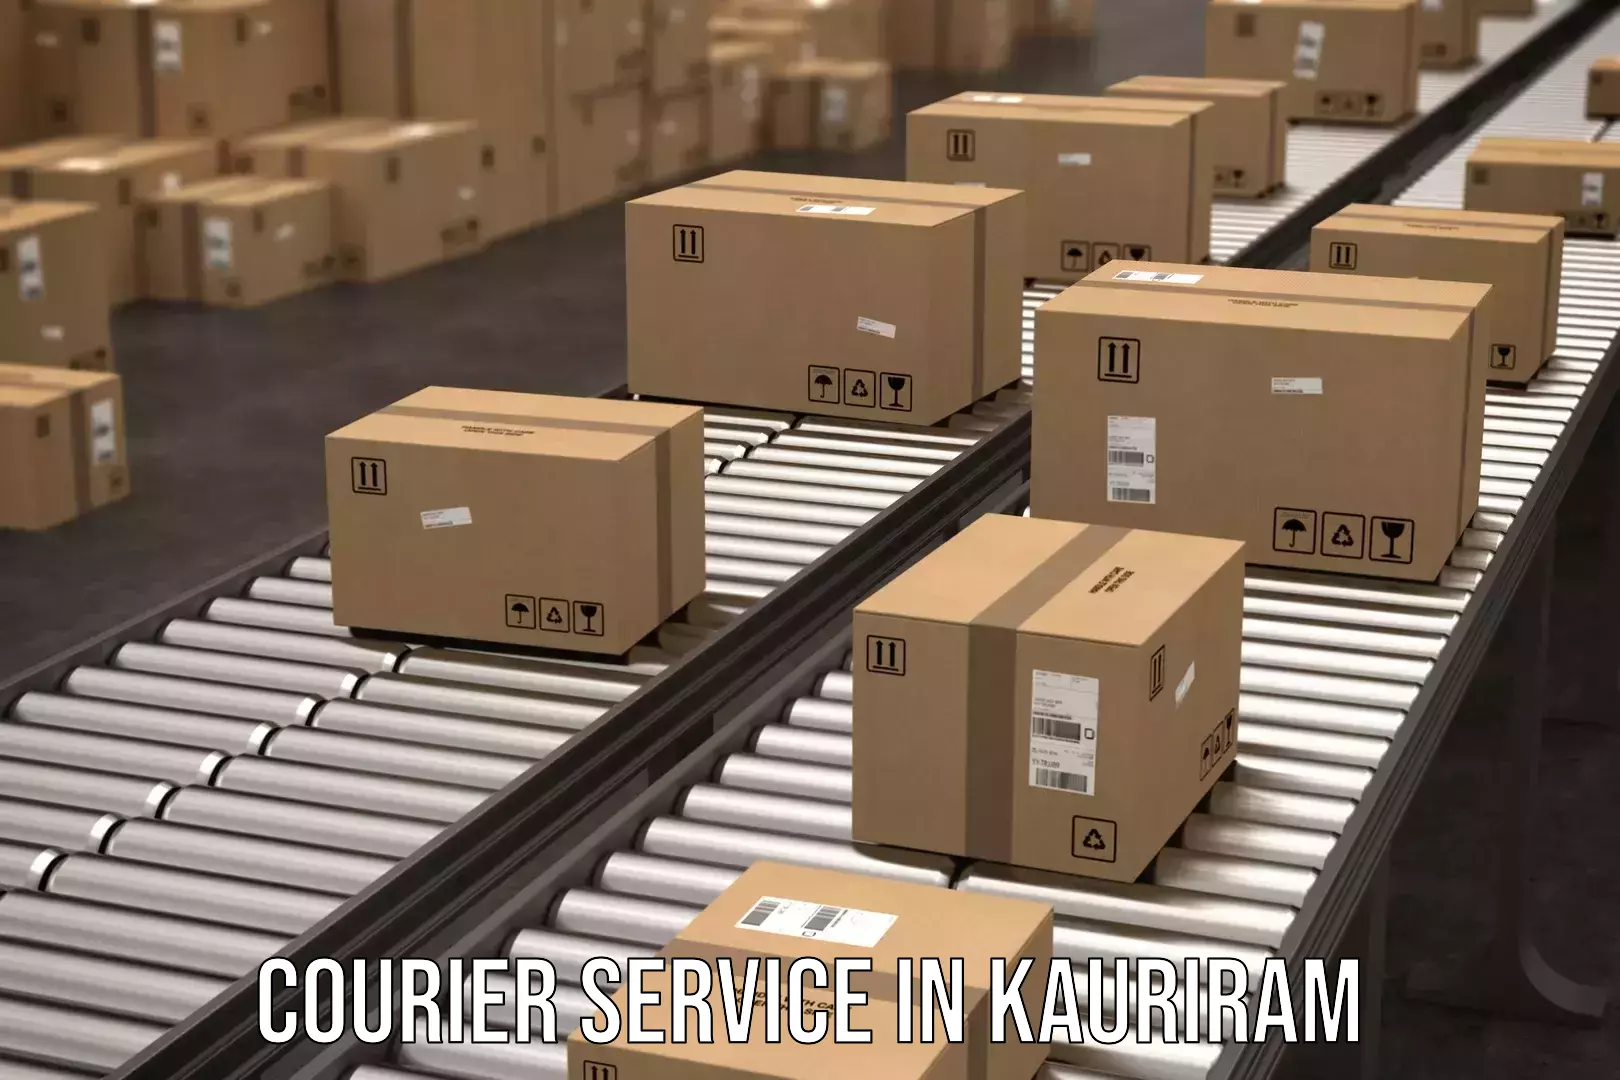 Efficient package consolidation in Kauriram